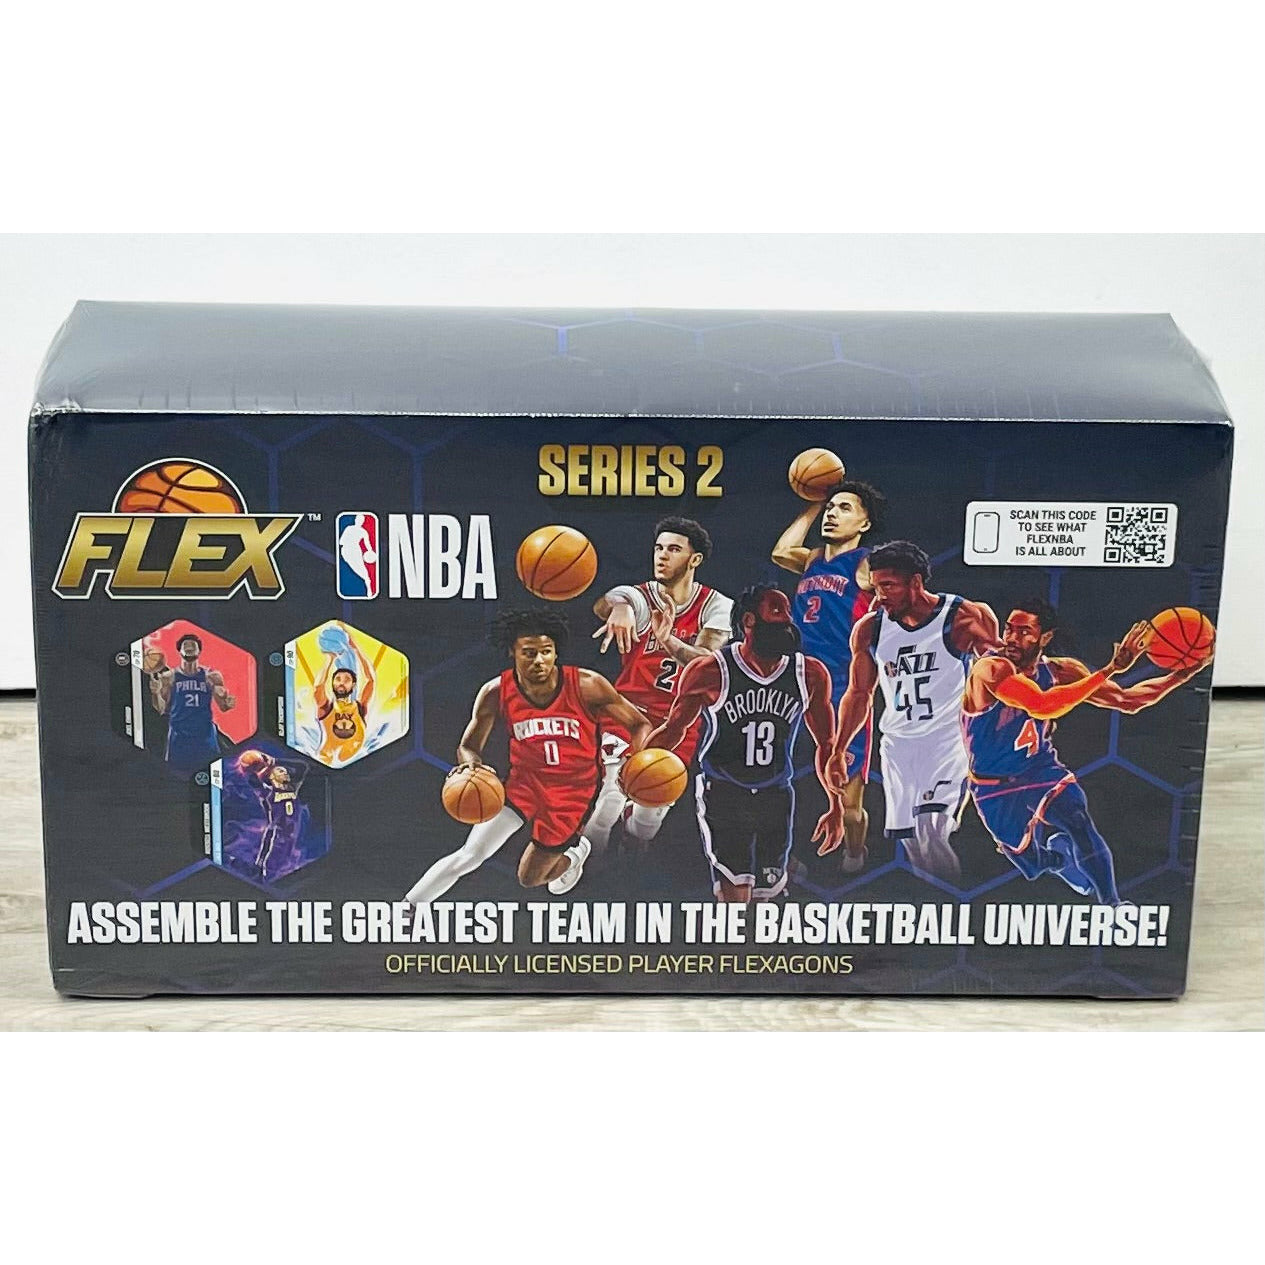 2022 Sequoia Games Flex NBA Series 2 (Display of 18 Boosters)- Factory Sealed